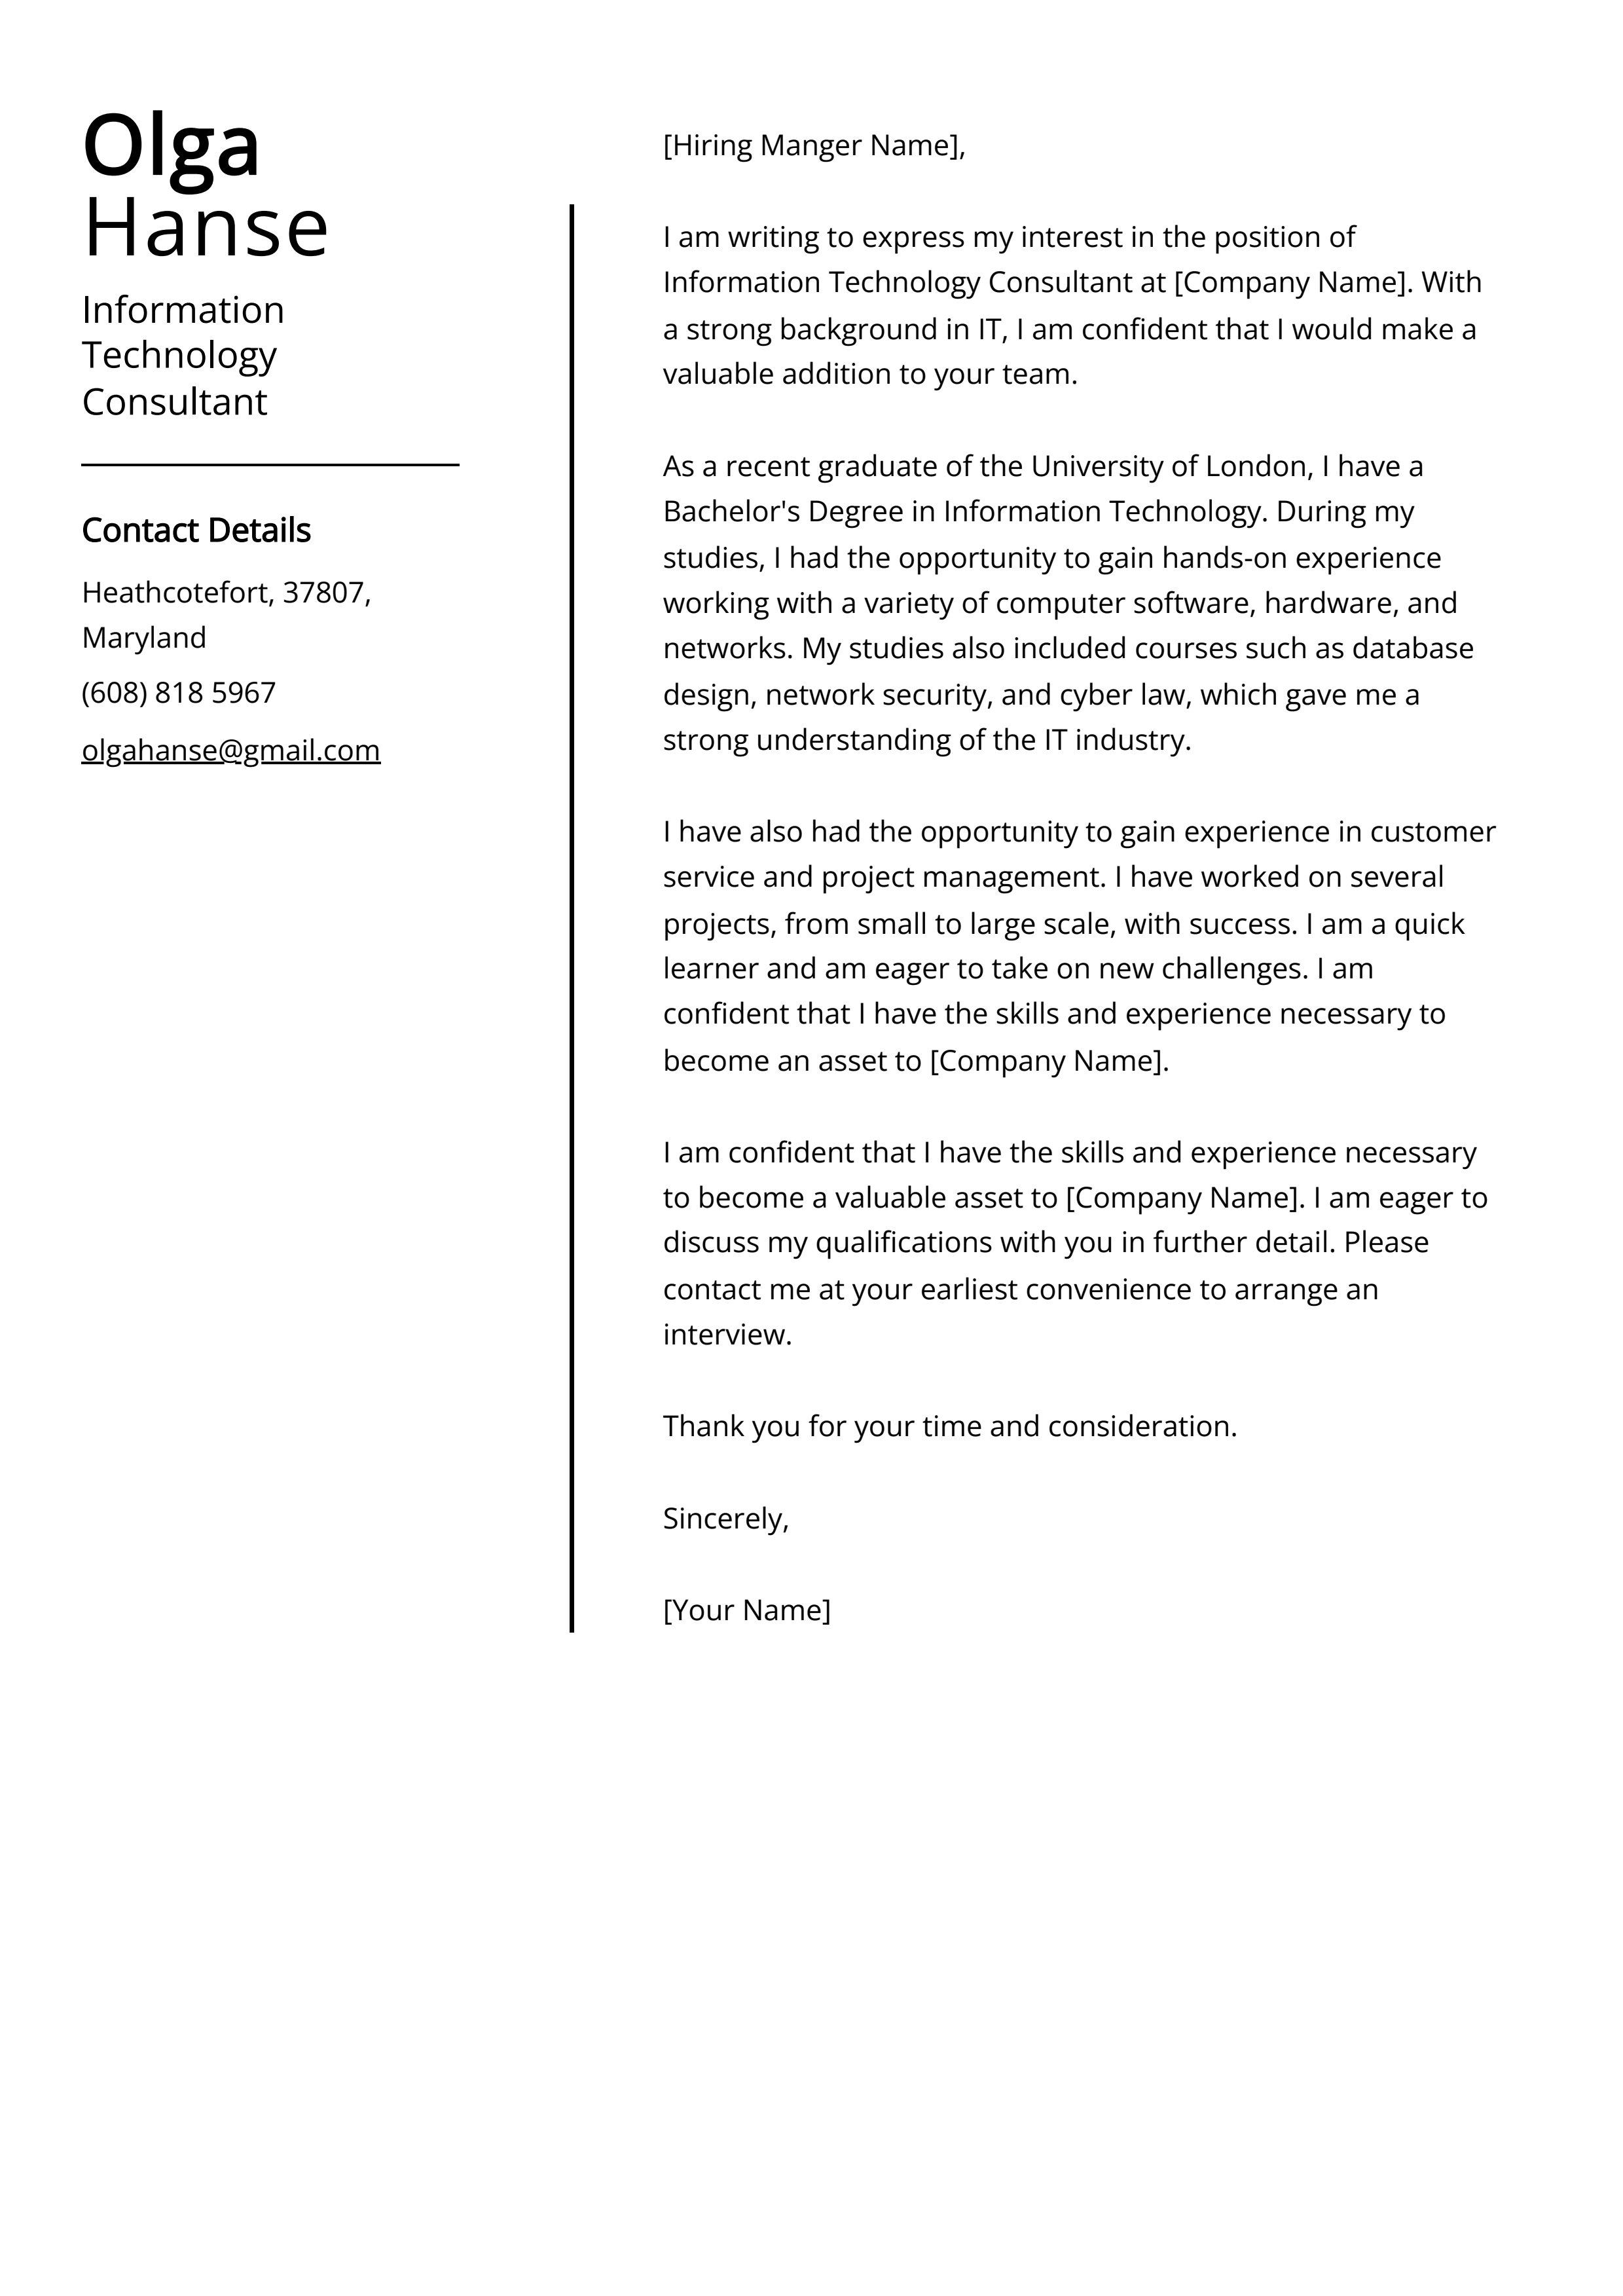 Information Technology Consultant Cover Letter Example